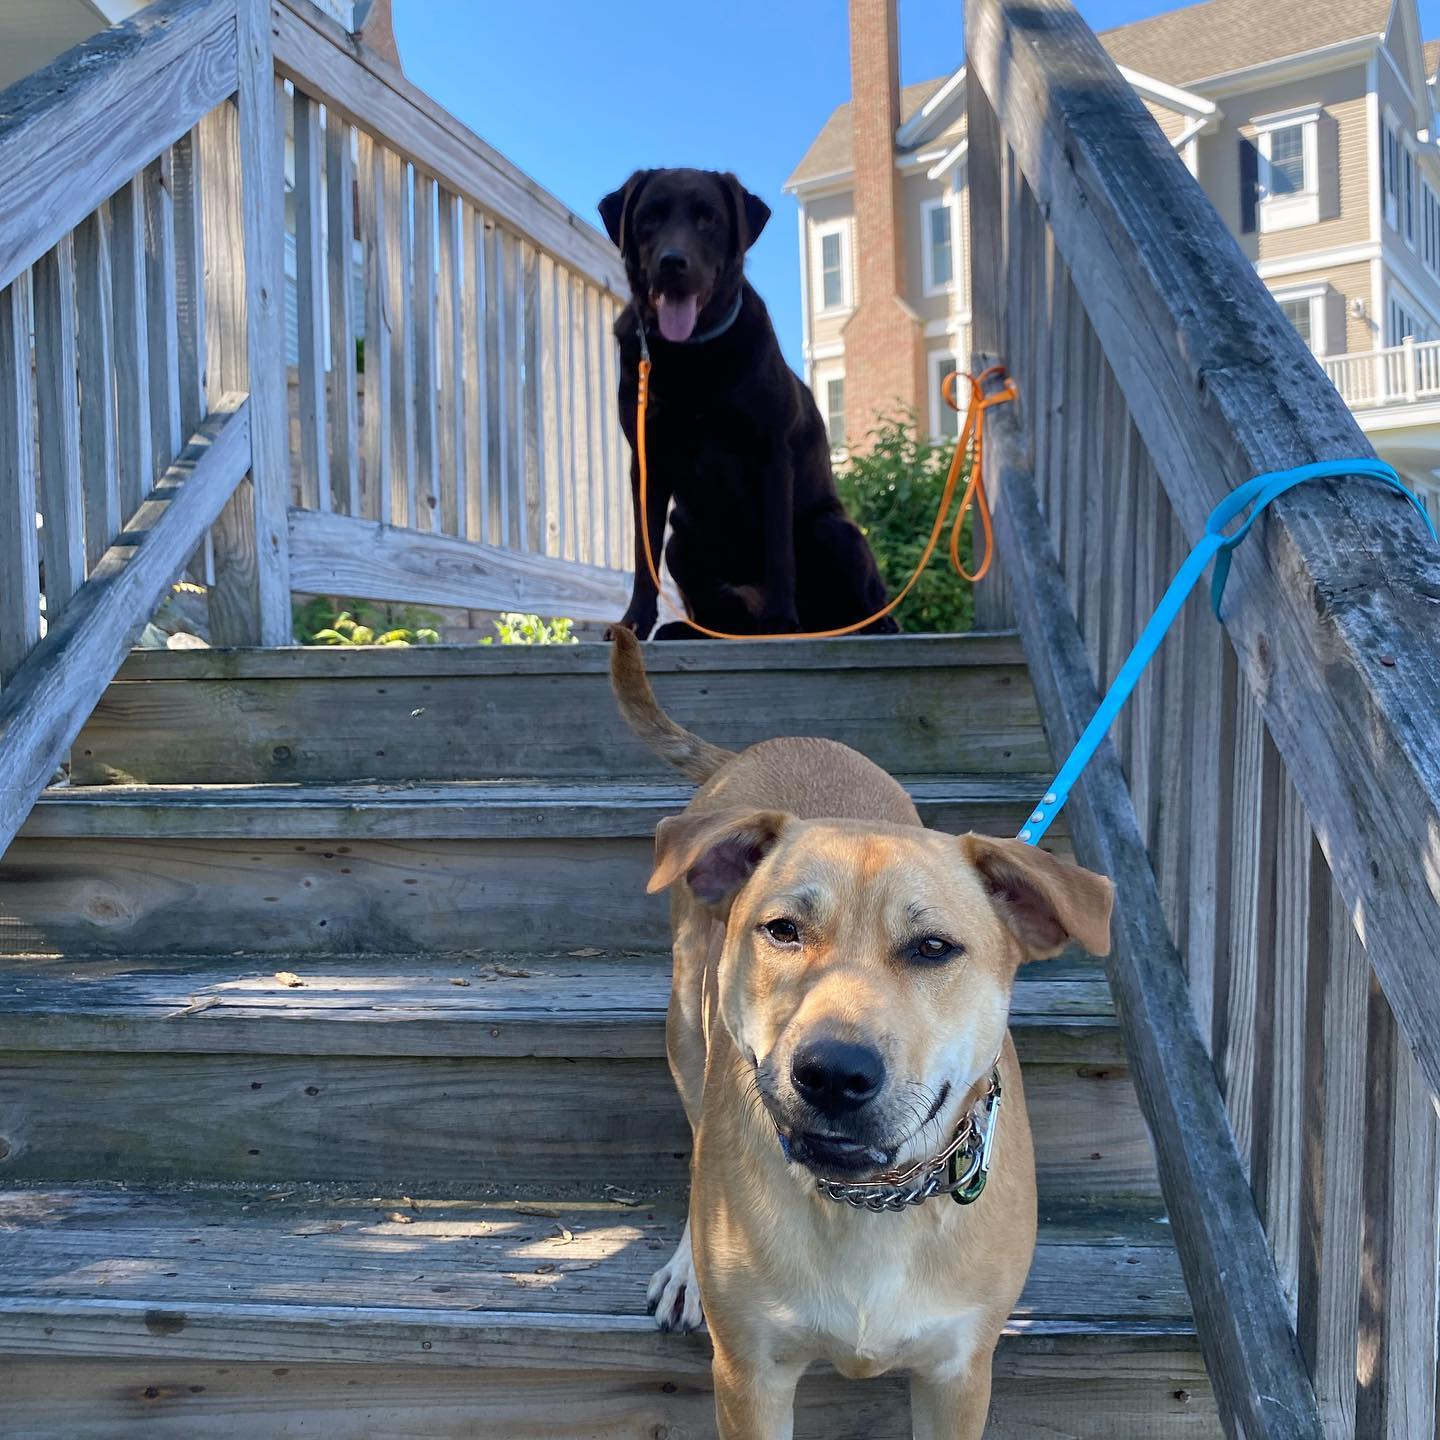 Two dogs walking down stairs